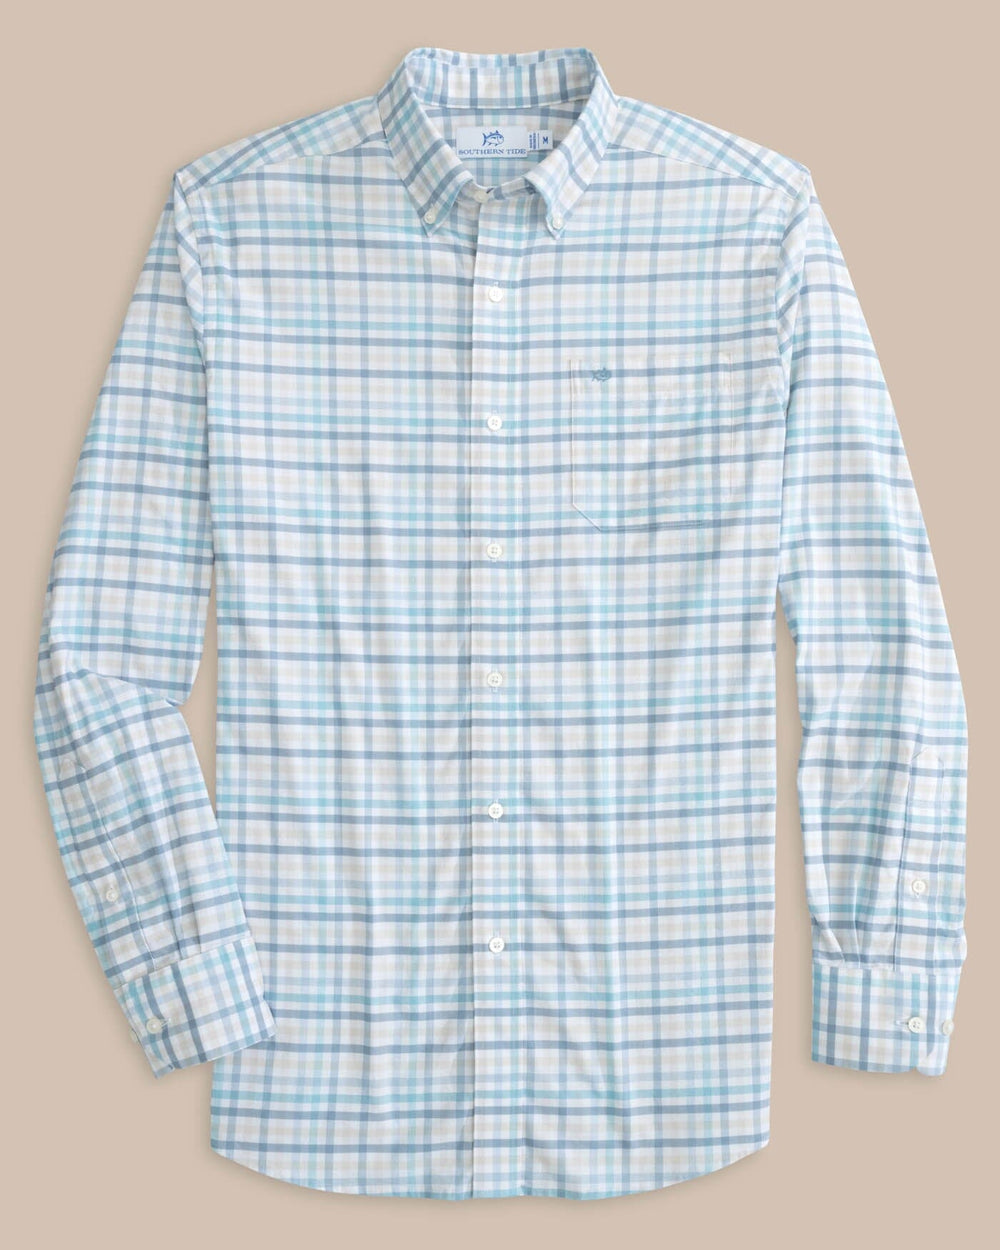 The front view of the Southern Tide Coastal Passage Pelham Gingham Long Sleeve Sport Shirt by Southern Tide - Marine Blue